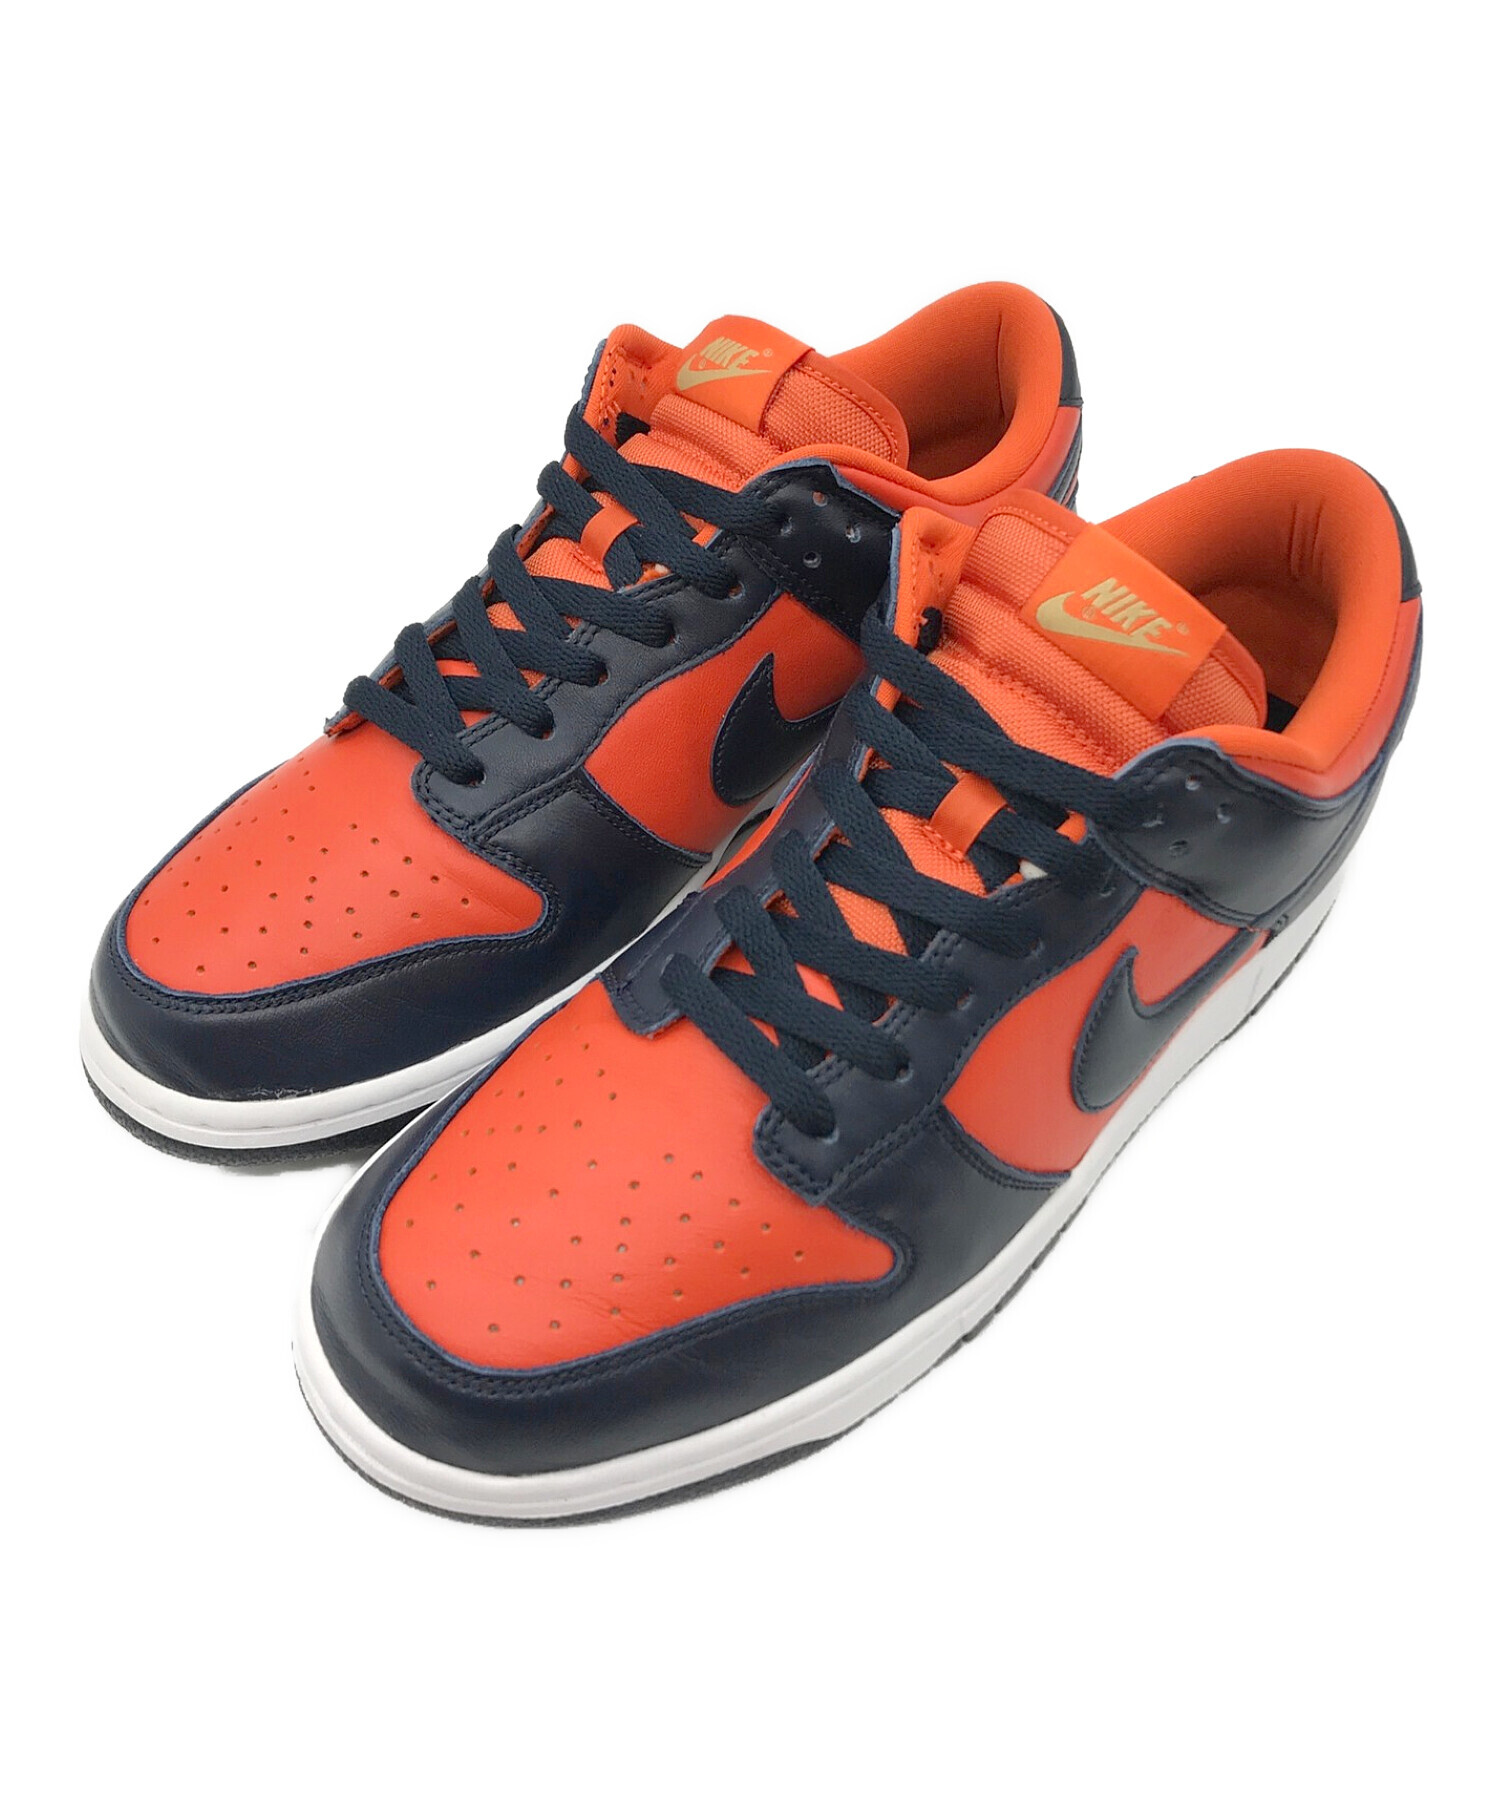 NIKE Dunk low champ colors